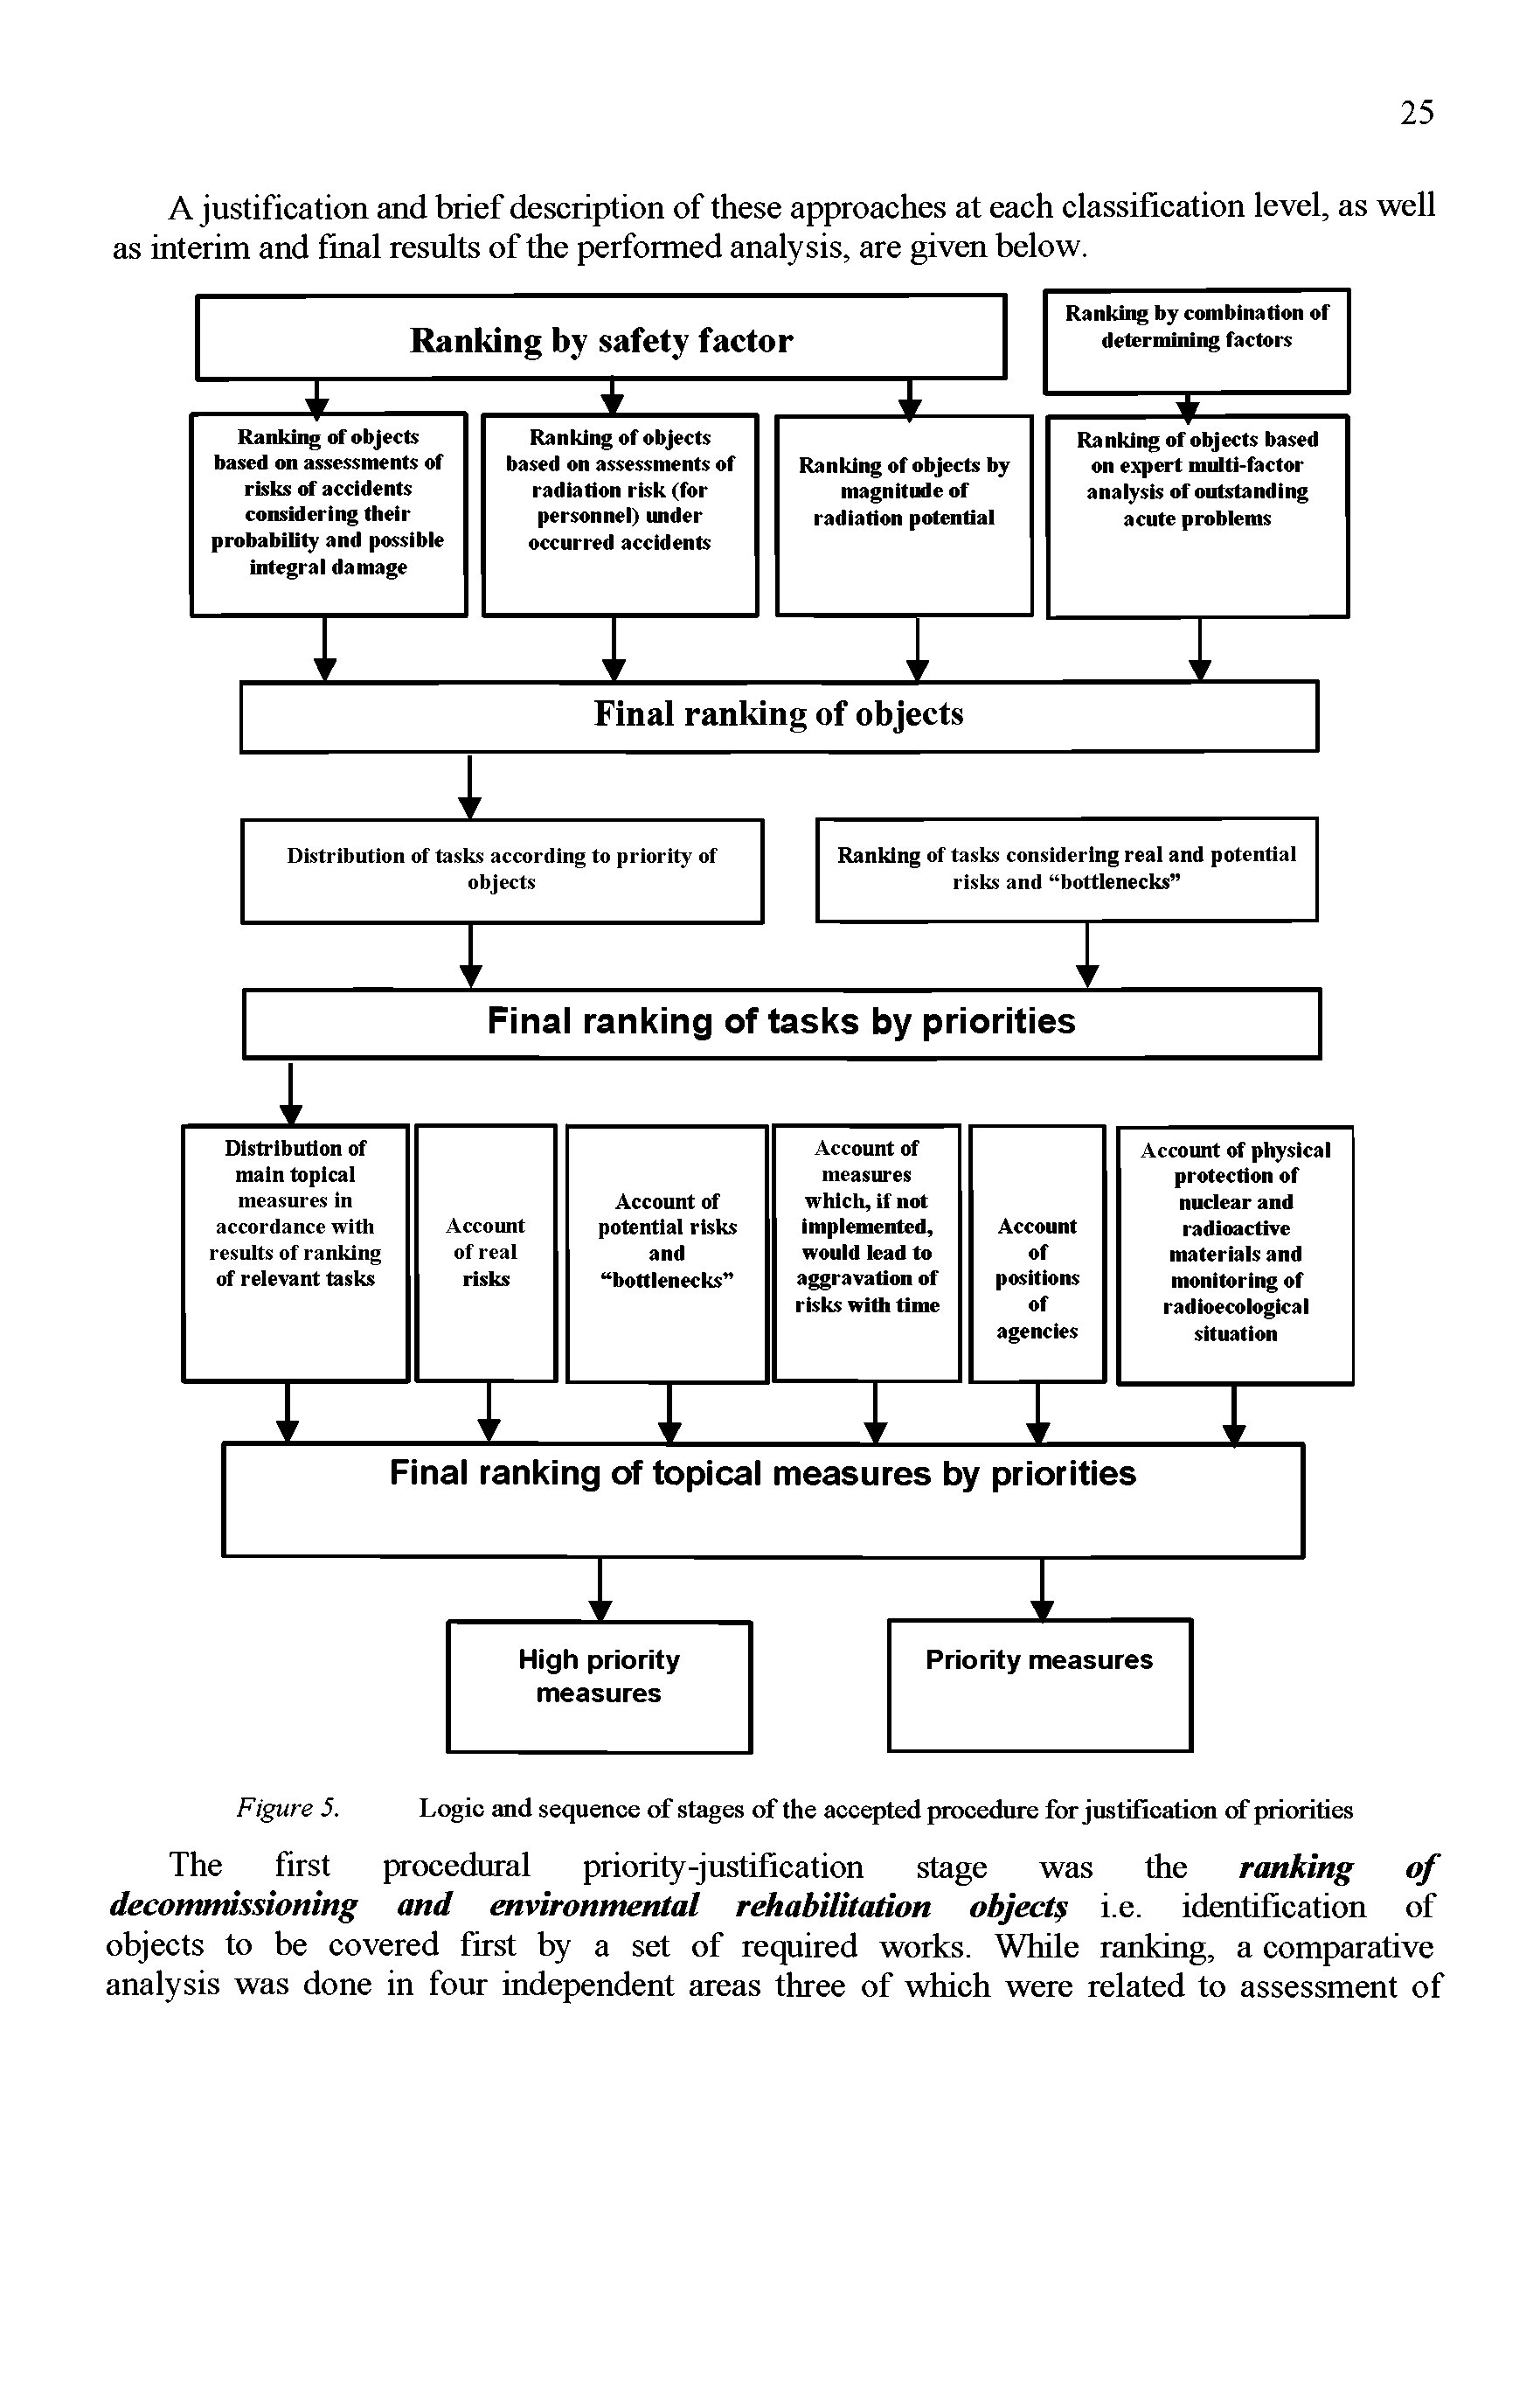 Figure 5. Logic said sequence of stages of the accepted procedure for justification of priorities...